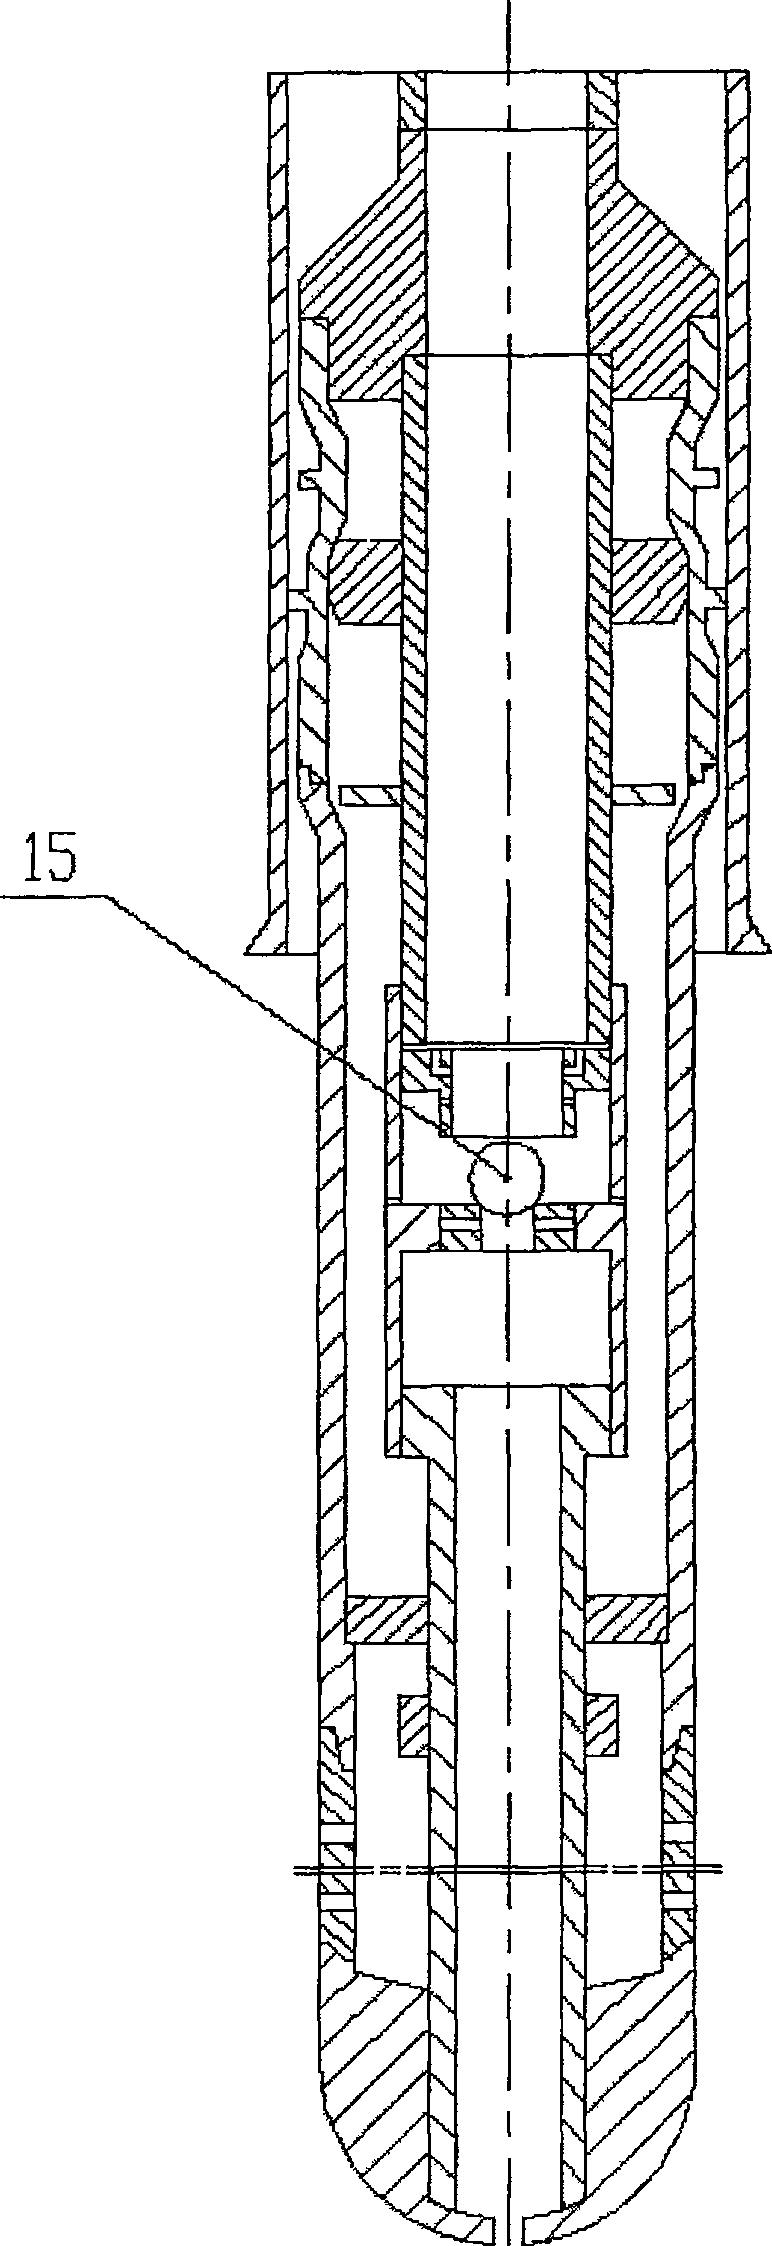 Swelling type screen pipe suspension method